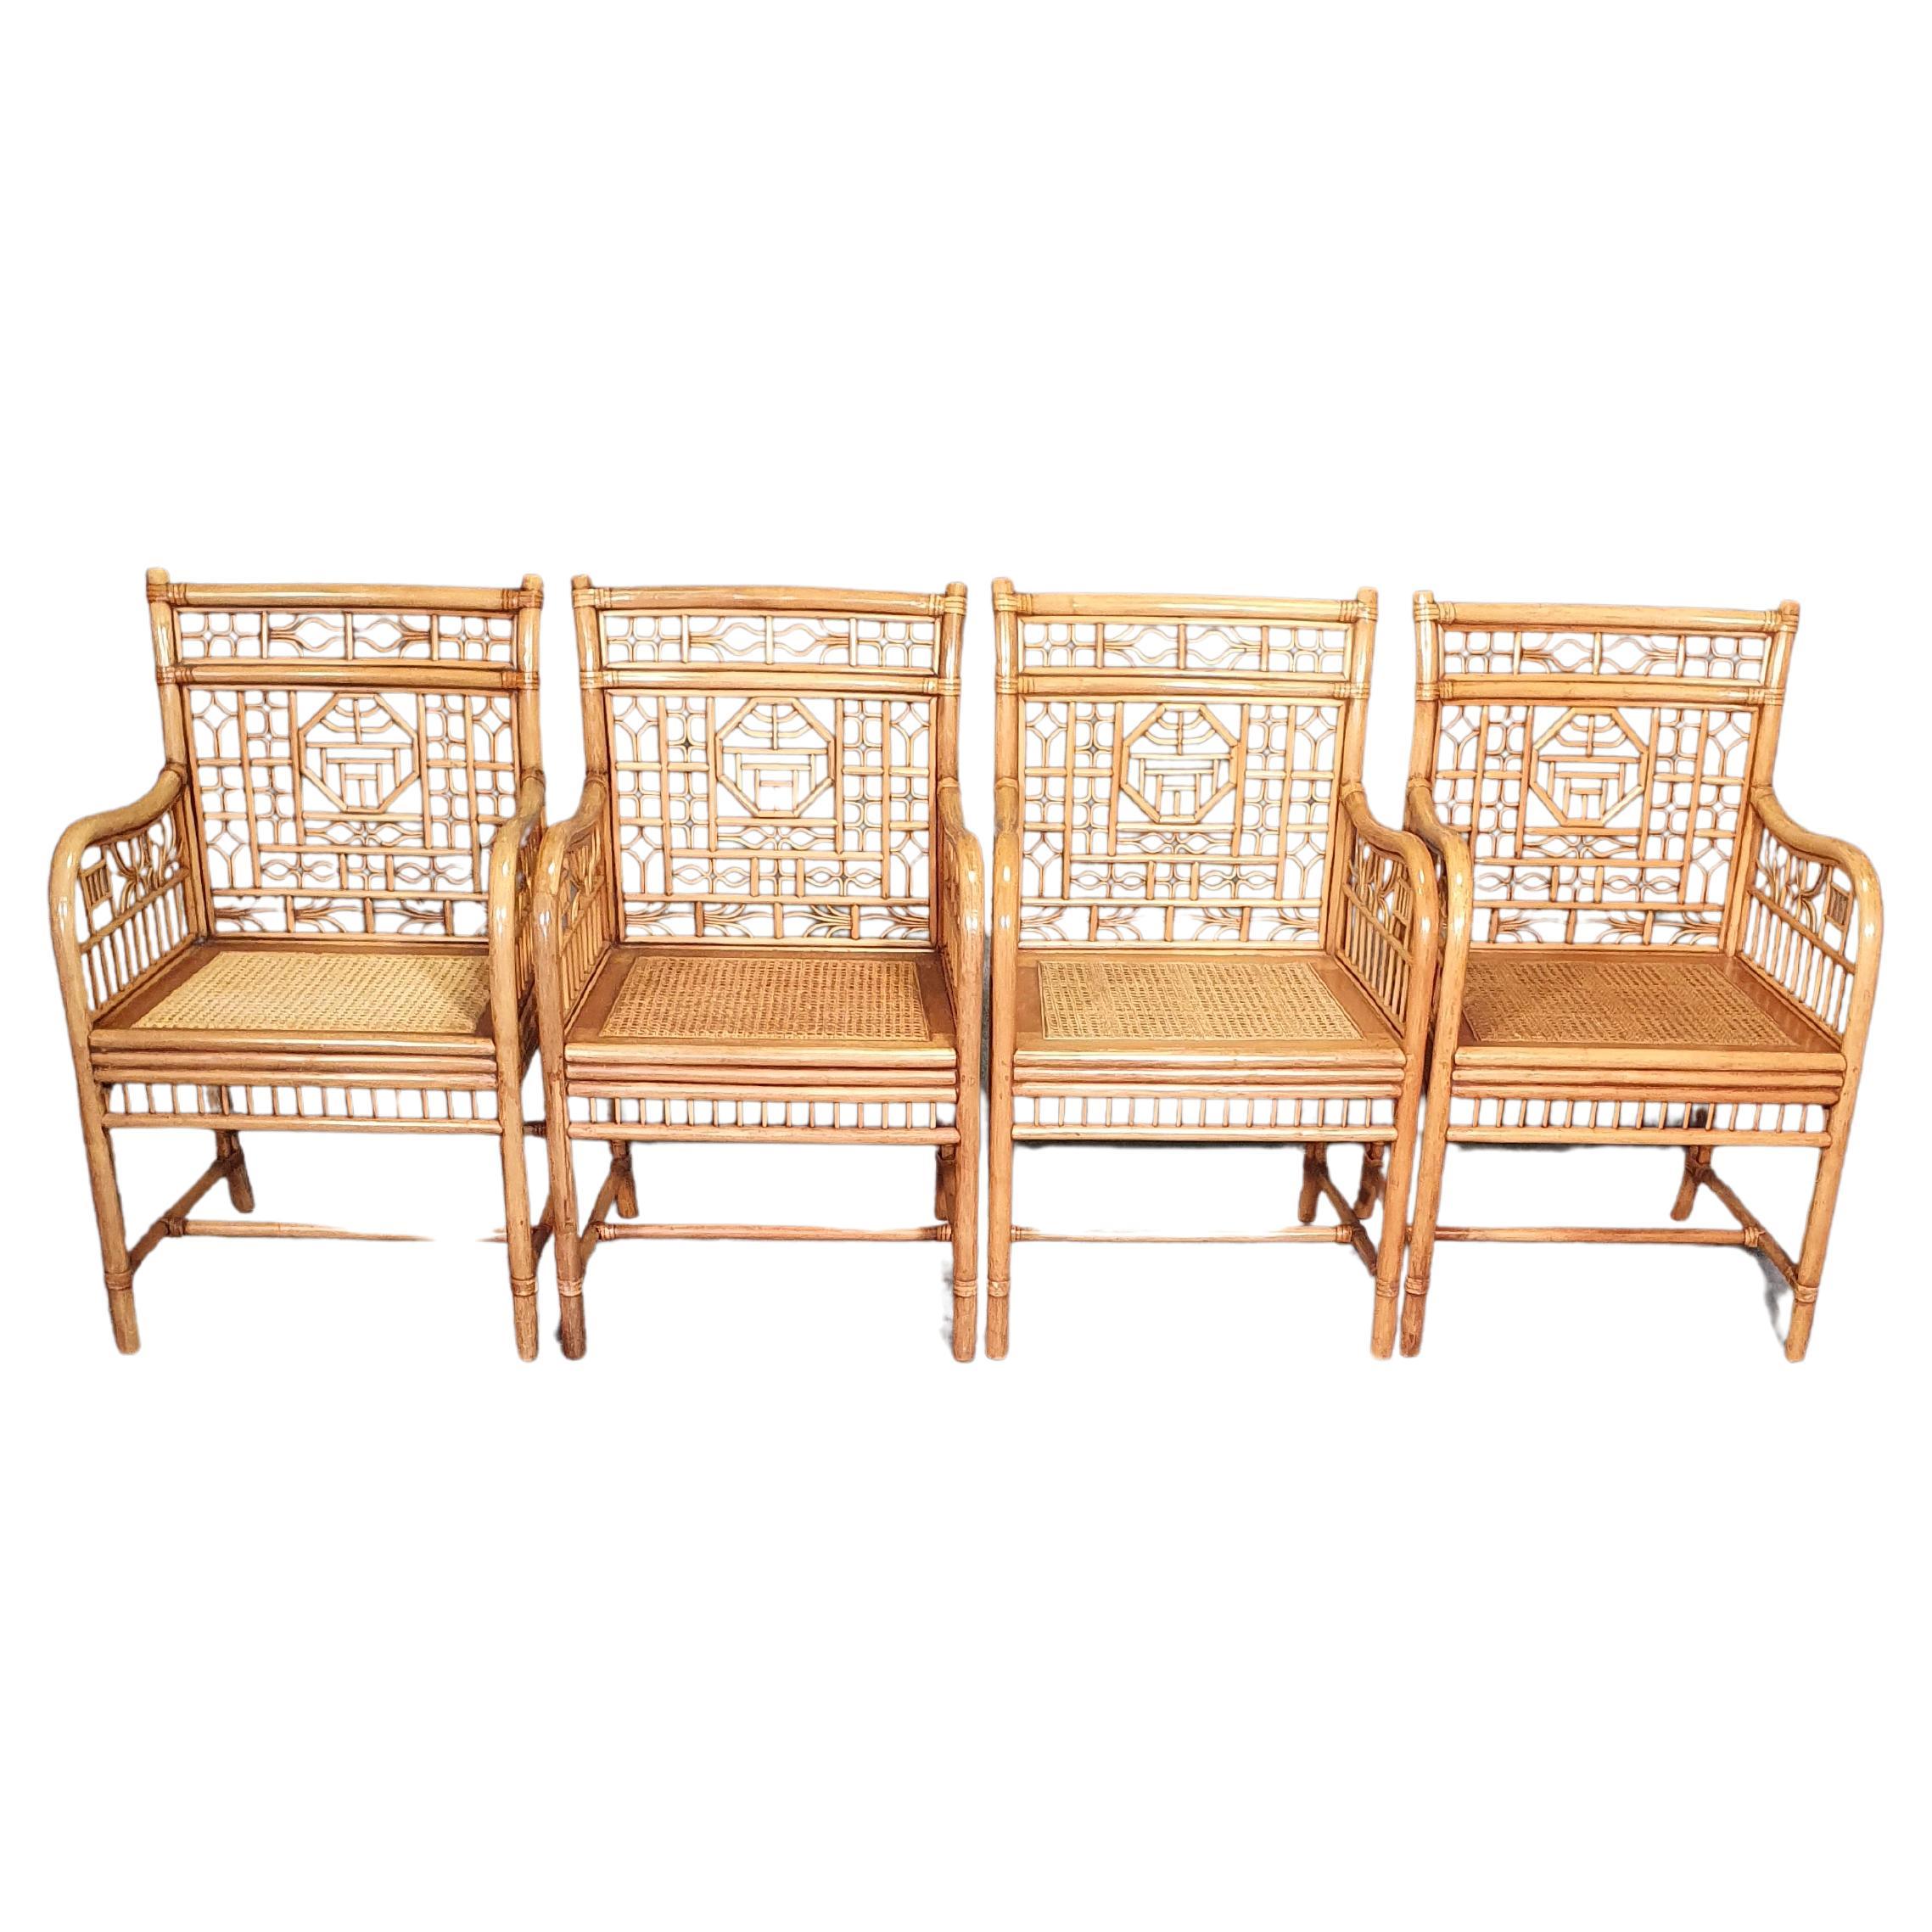 4 x Mcguire rattan chair marked Chinois / Chinoiserie Chique bamboo For Sale